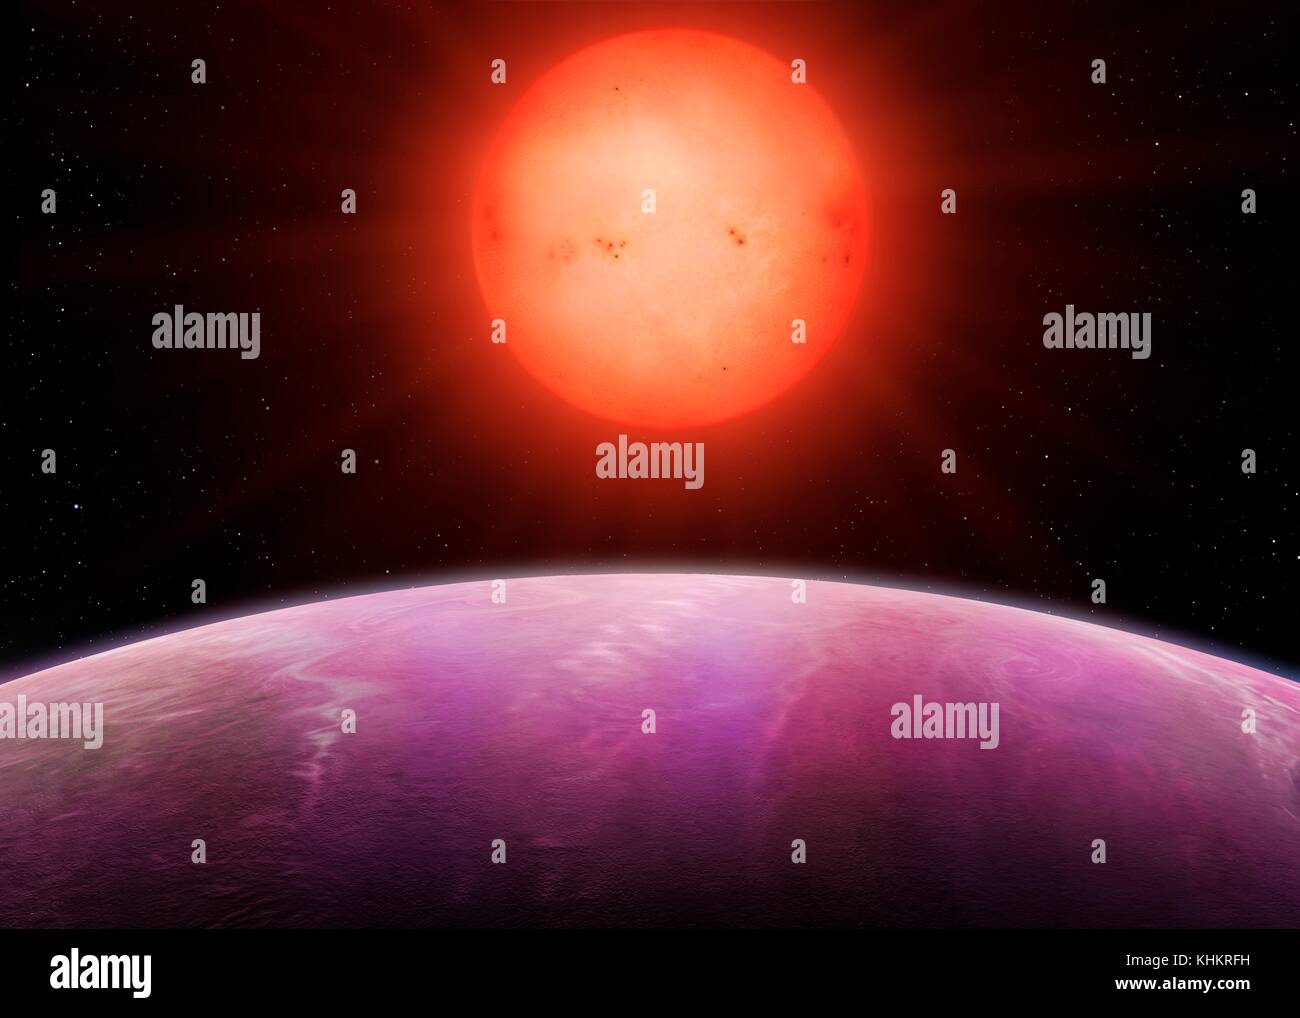 Red dwarf NGTS-1 and its gas giant planet, illustration. NGTS (Next-Generation Transit Survey) is located in the Atacama desert in Chile, with a primary aim to locate extrasolar planets with masses and sizes between those of Earth and Neptune. One of the discoveries is NGTS-1, a red dwarf star about half the diameter of the Sun. It has been found to host a planet almost one-quarter of its size, which makes it the largest known planet in relation to its star. Stock Photo